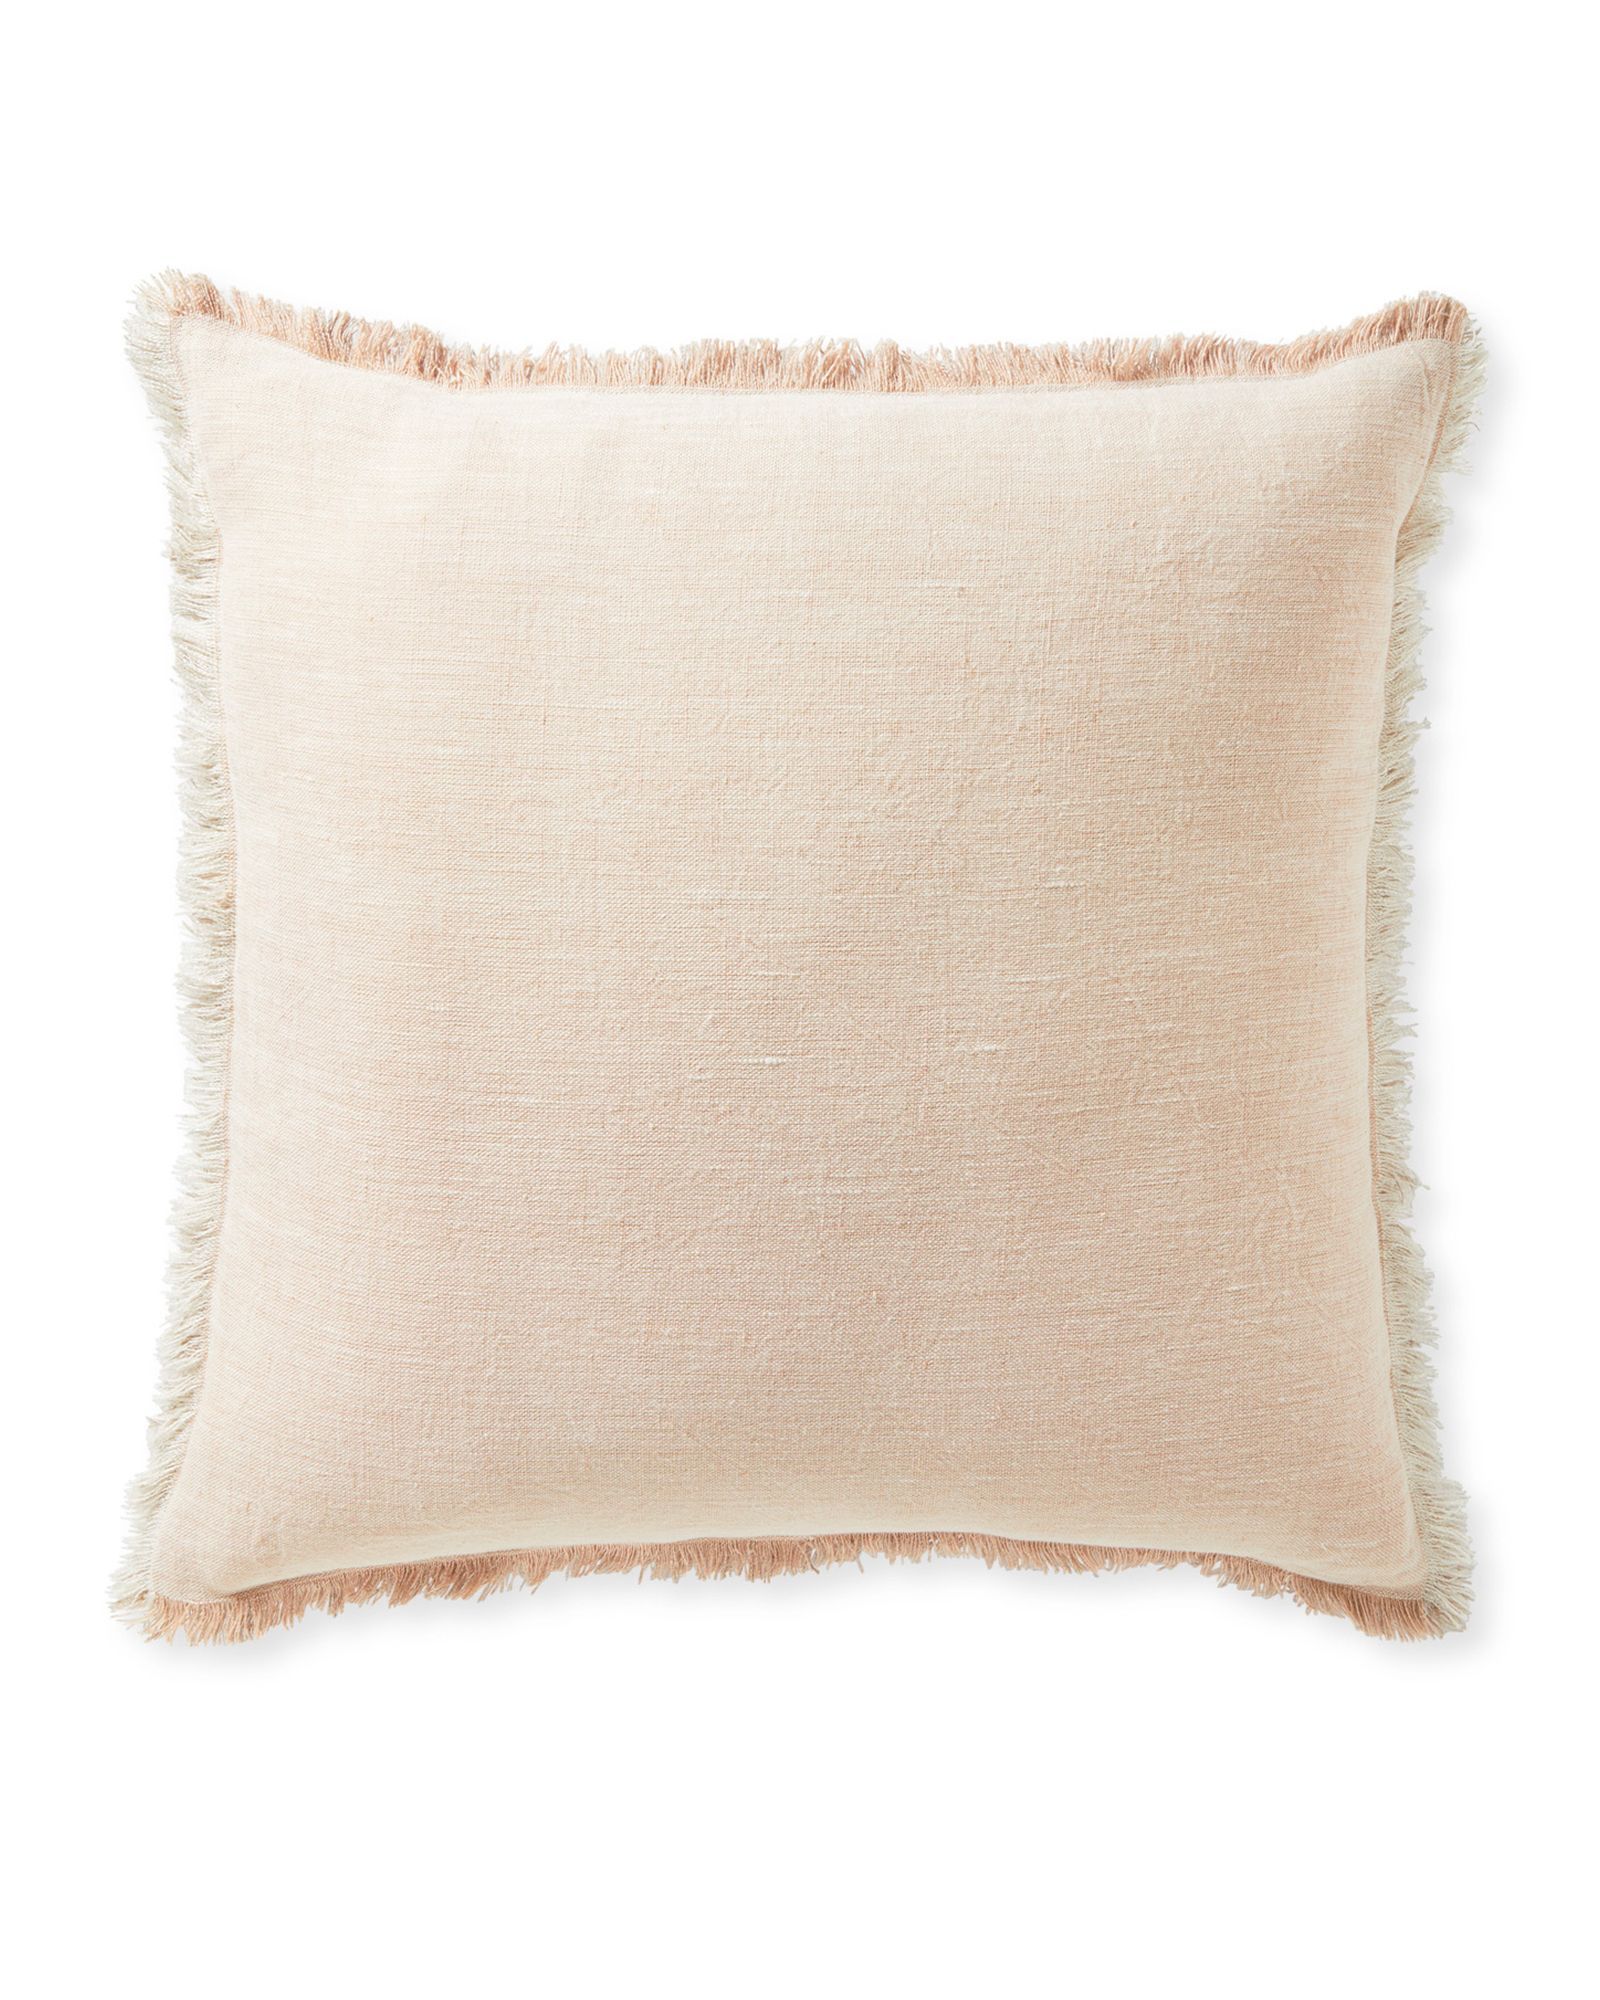 Avalis Pillow Cover